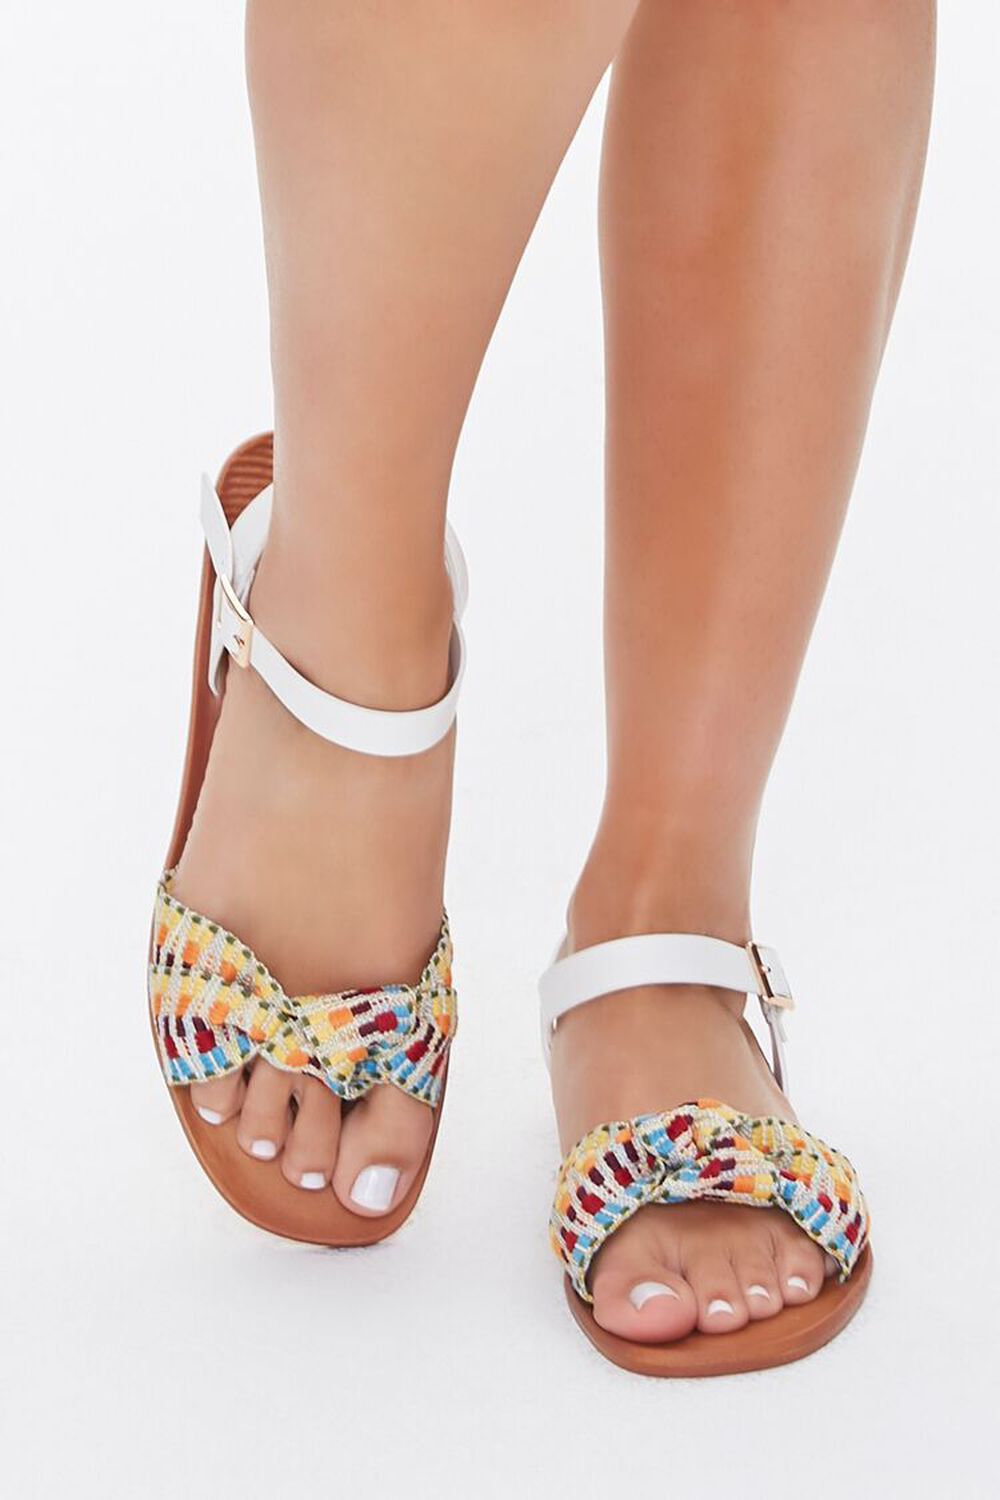 WHITE/MULTI Knotted Geo Print Sandals, image 2